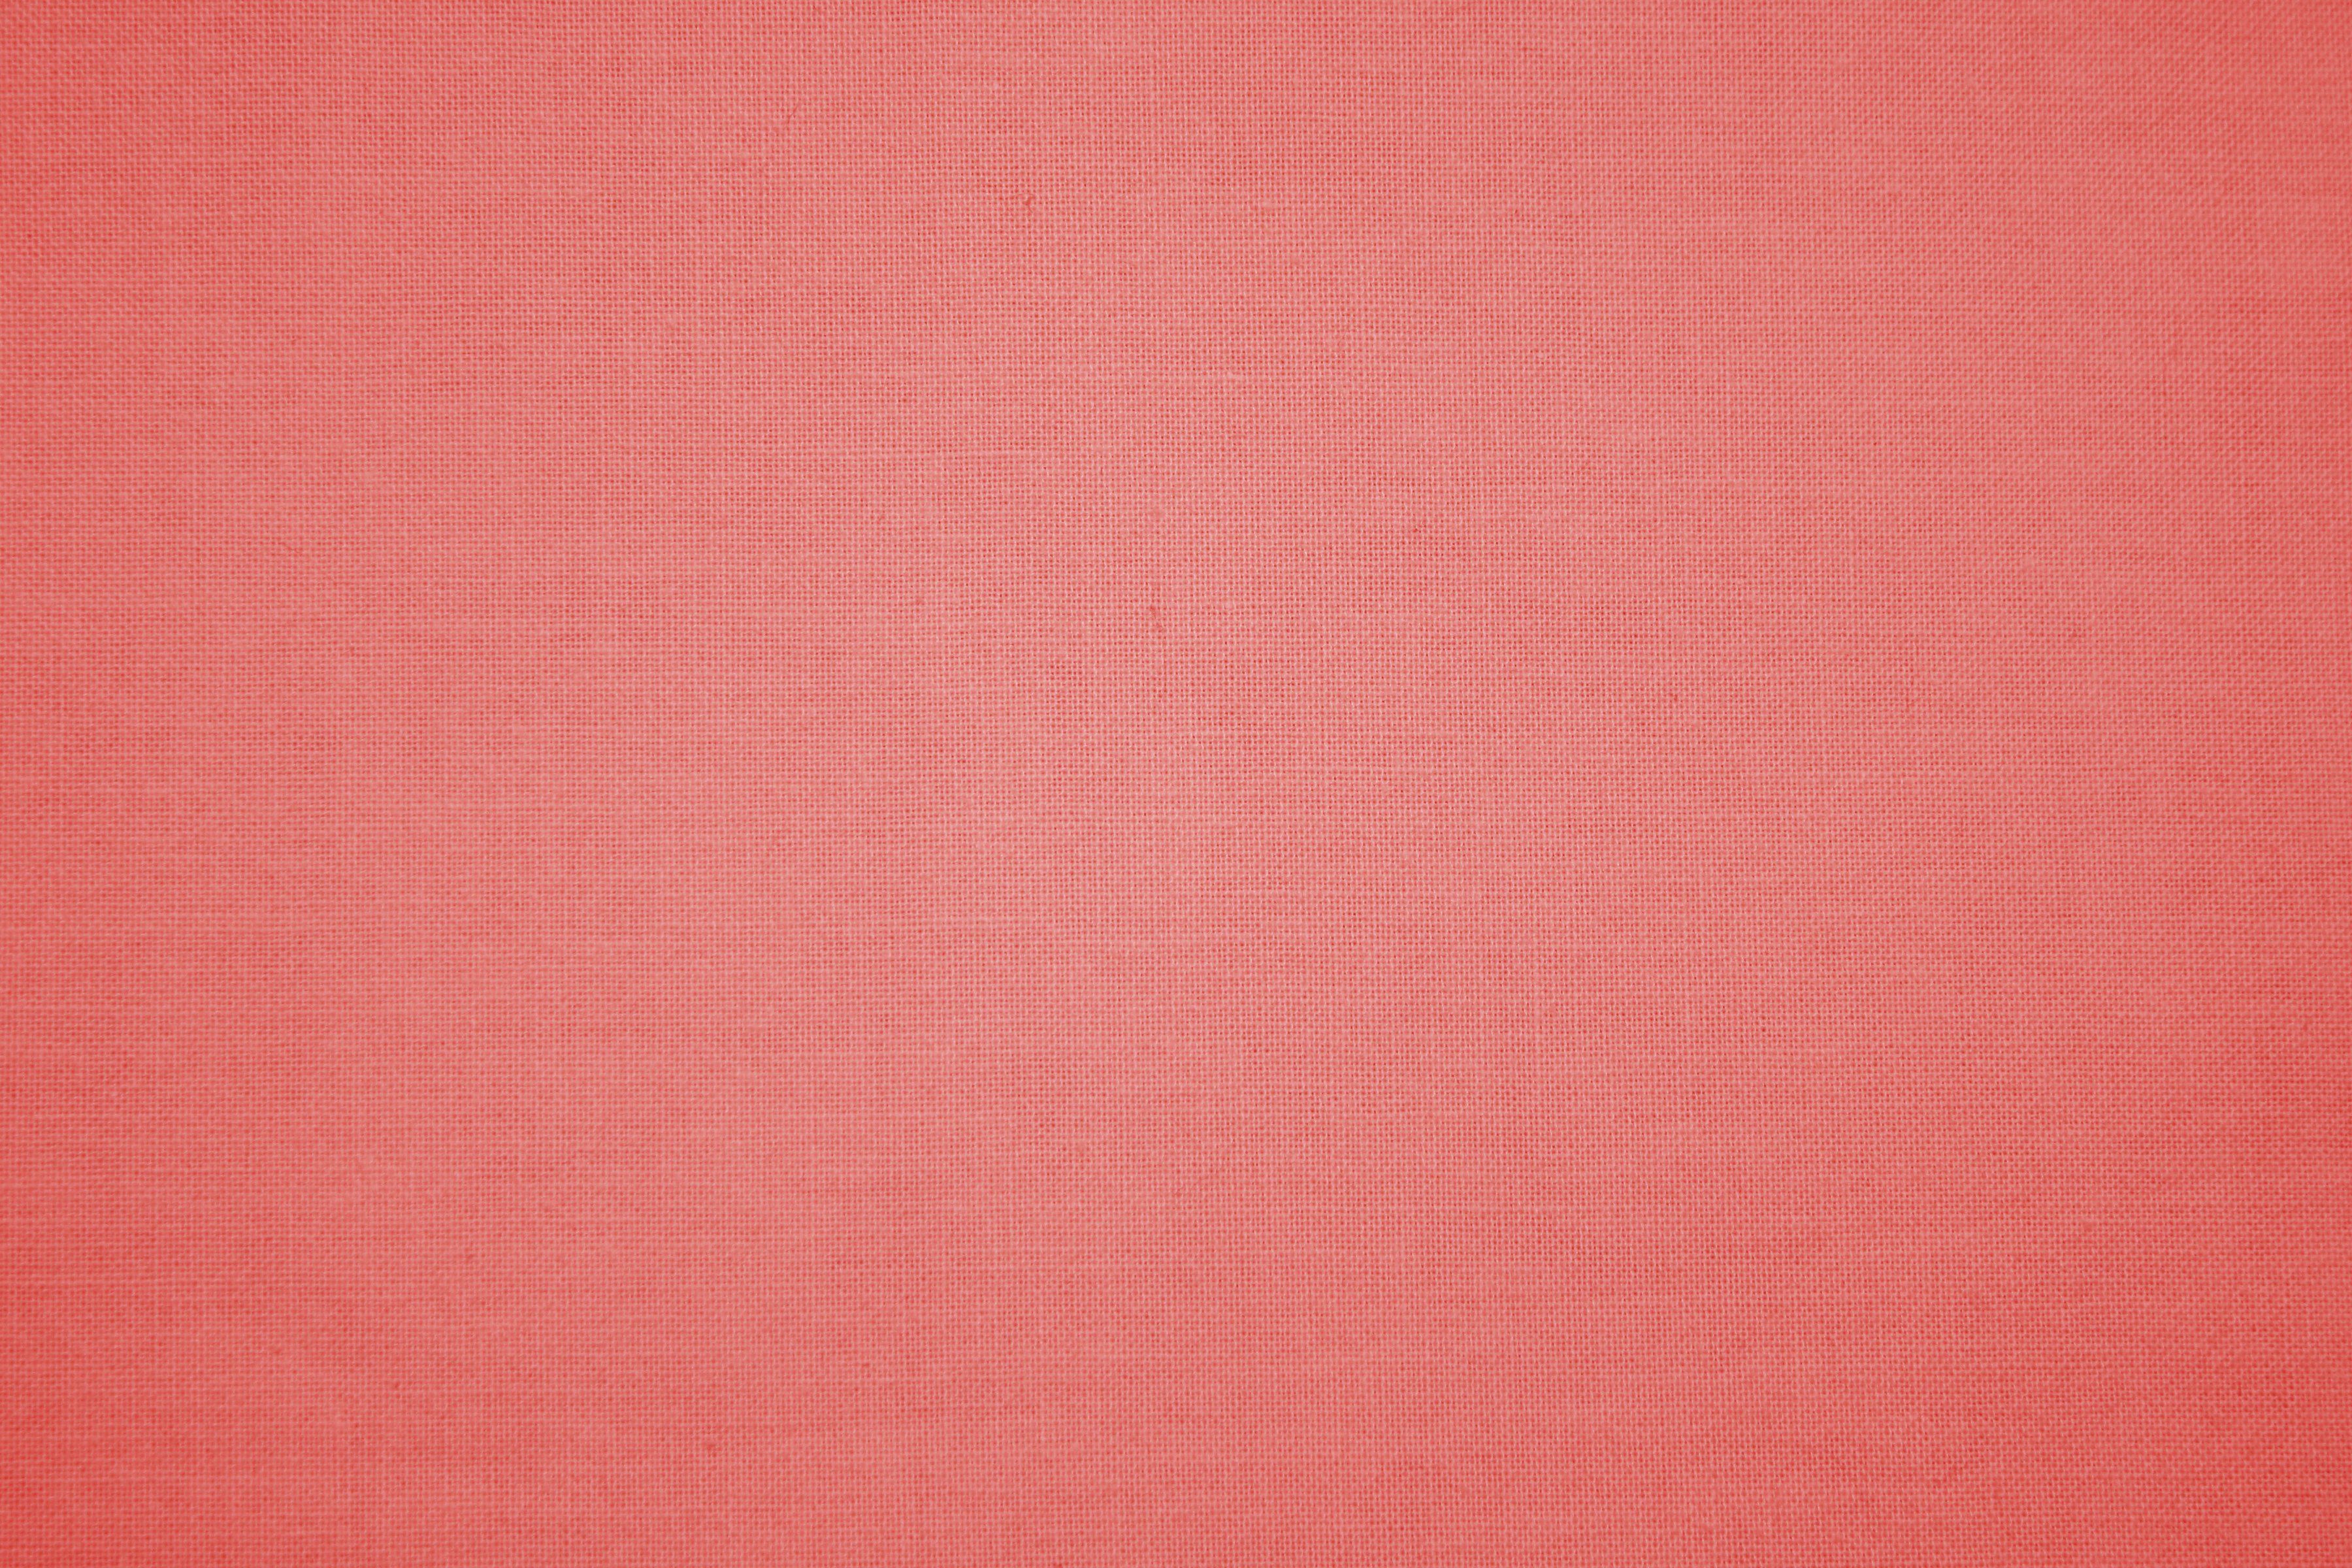 Light Red S Fabric Texture Picture Photograph Photos